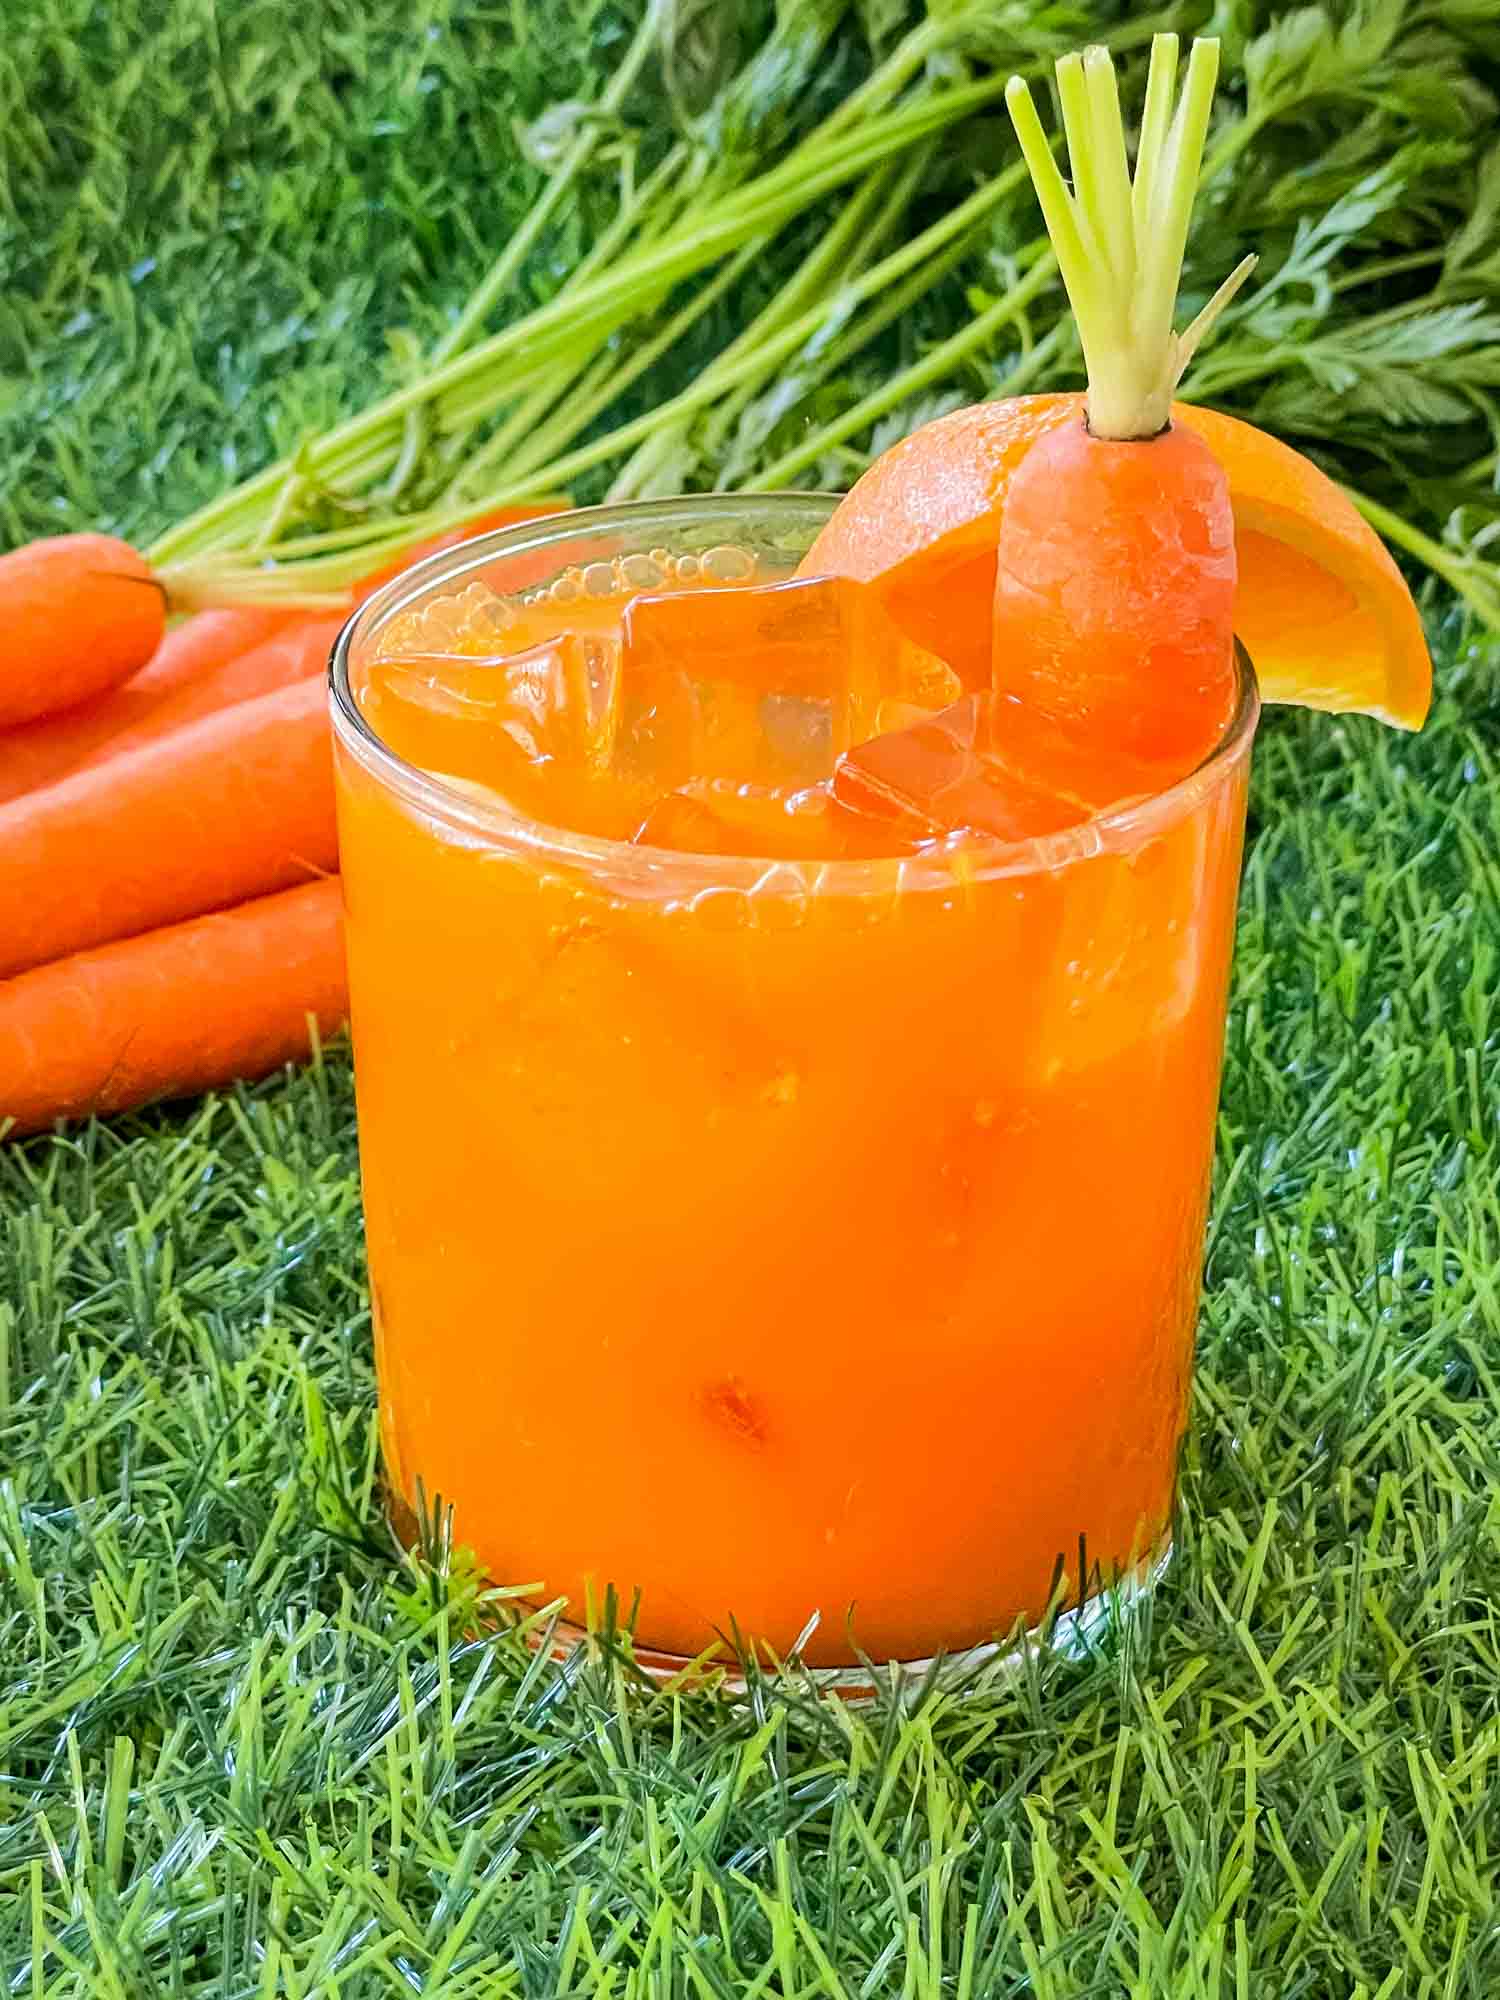 A glass of Carrot Patch Mocktail sitting on grass with some carrots behind it